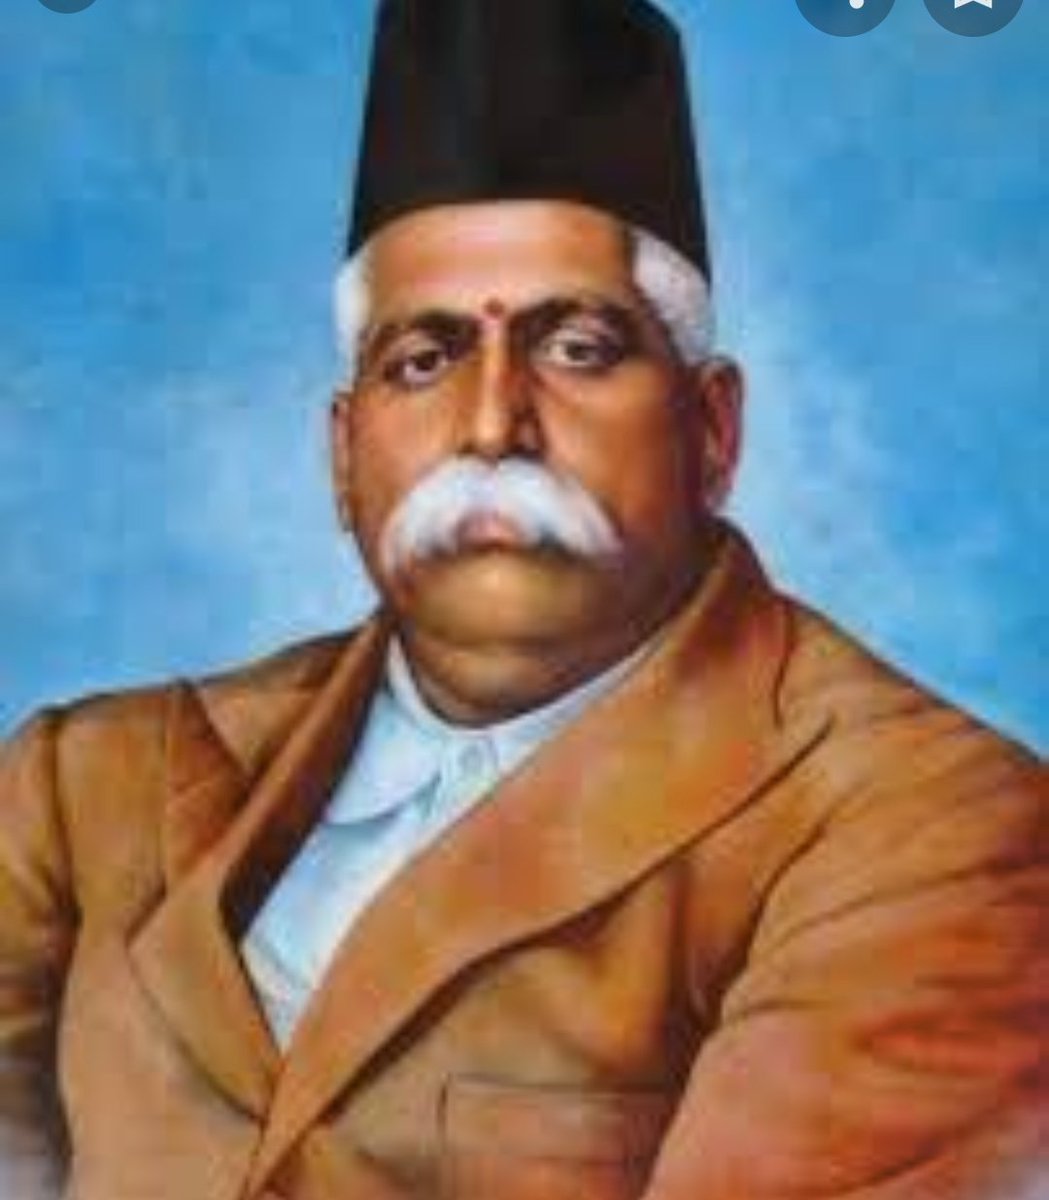 How many of us really know about the details of RSS chief ..Academic information of *RSS chiefs ..............**EDUCATIONAL BACKGROUND OF RSS CHIEFS**DrKeshav Baliram Hedgewar* - Founder, was a *MBBS* of 1914 from National Medical College Calcutta.